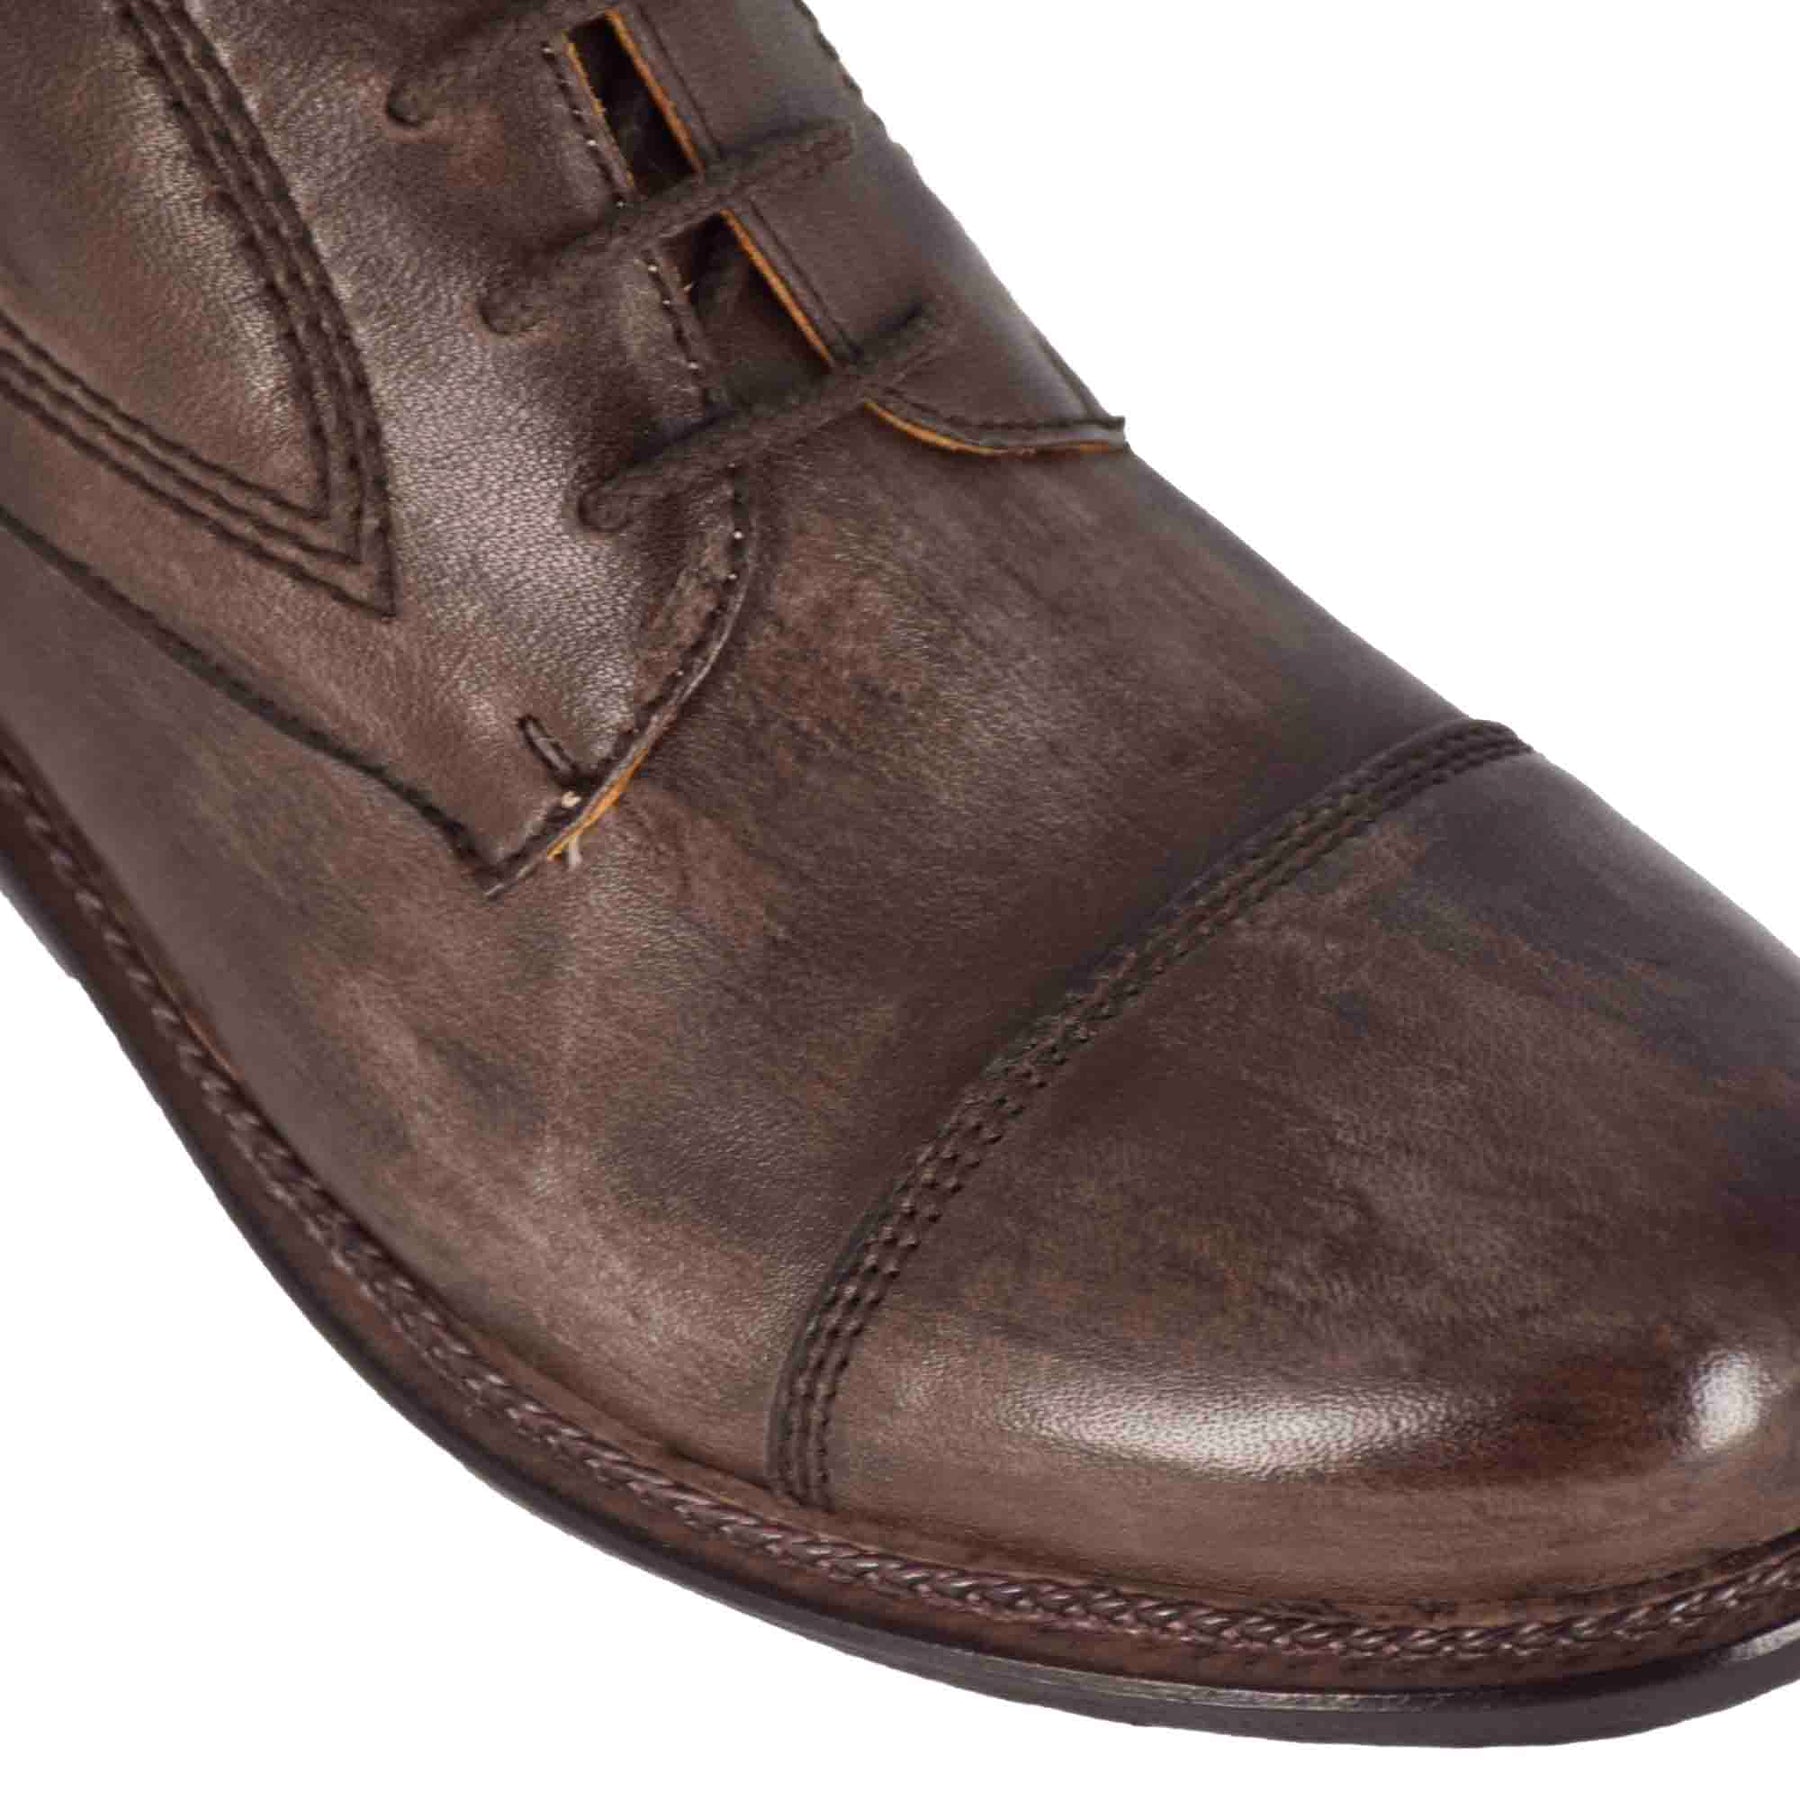 Men's lace-up ankle boots in dark brown leather